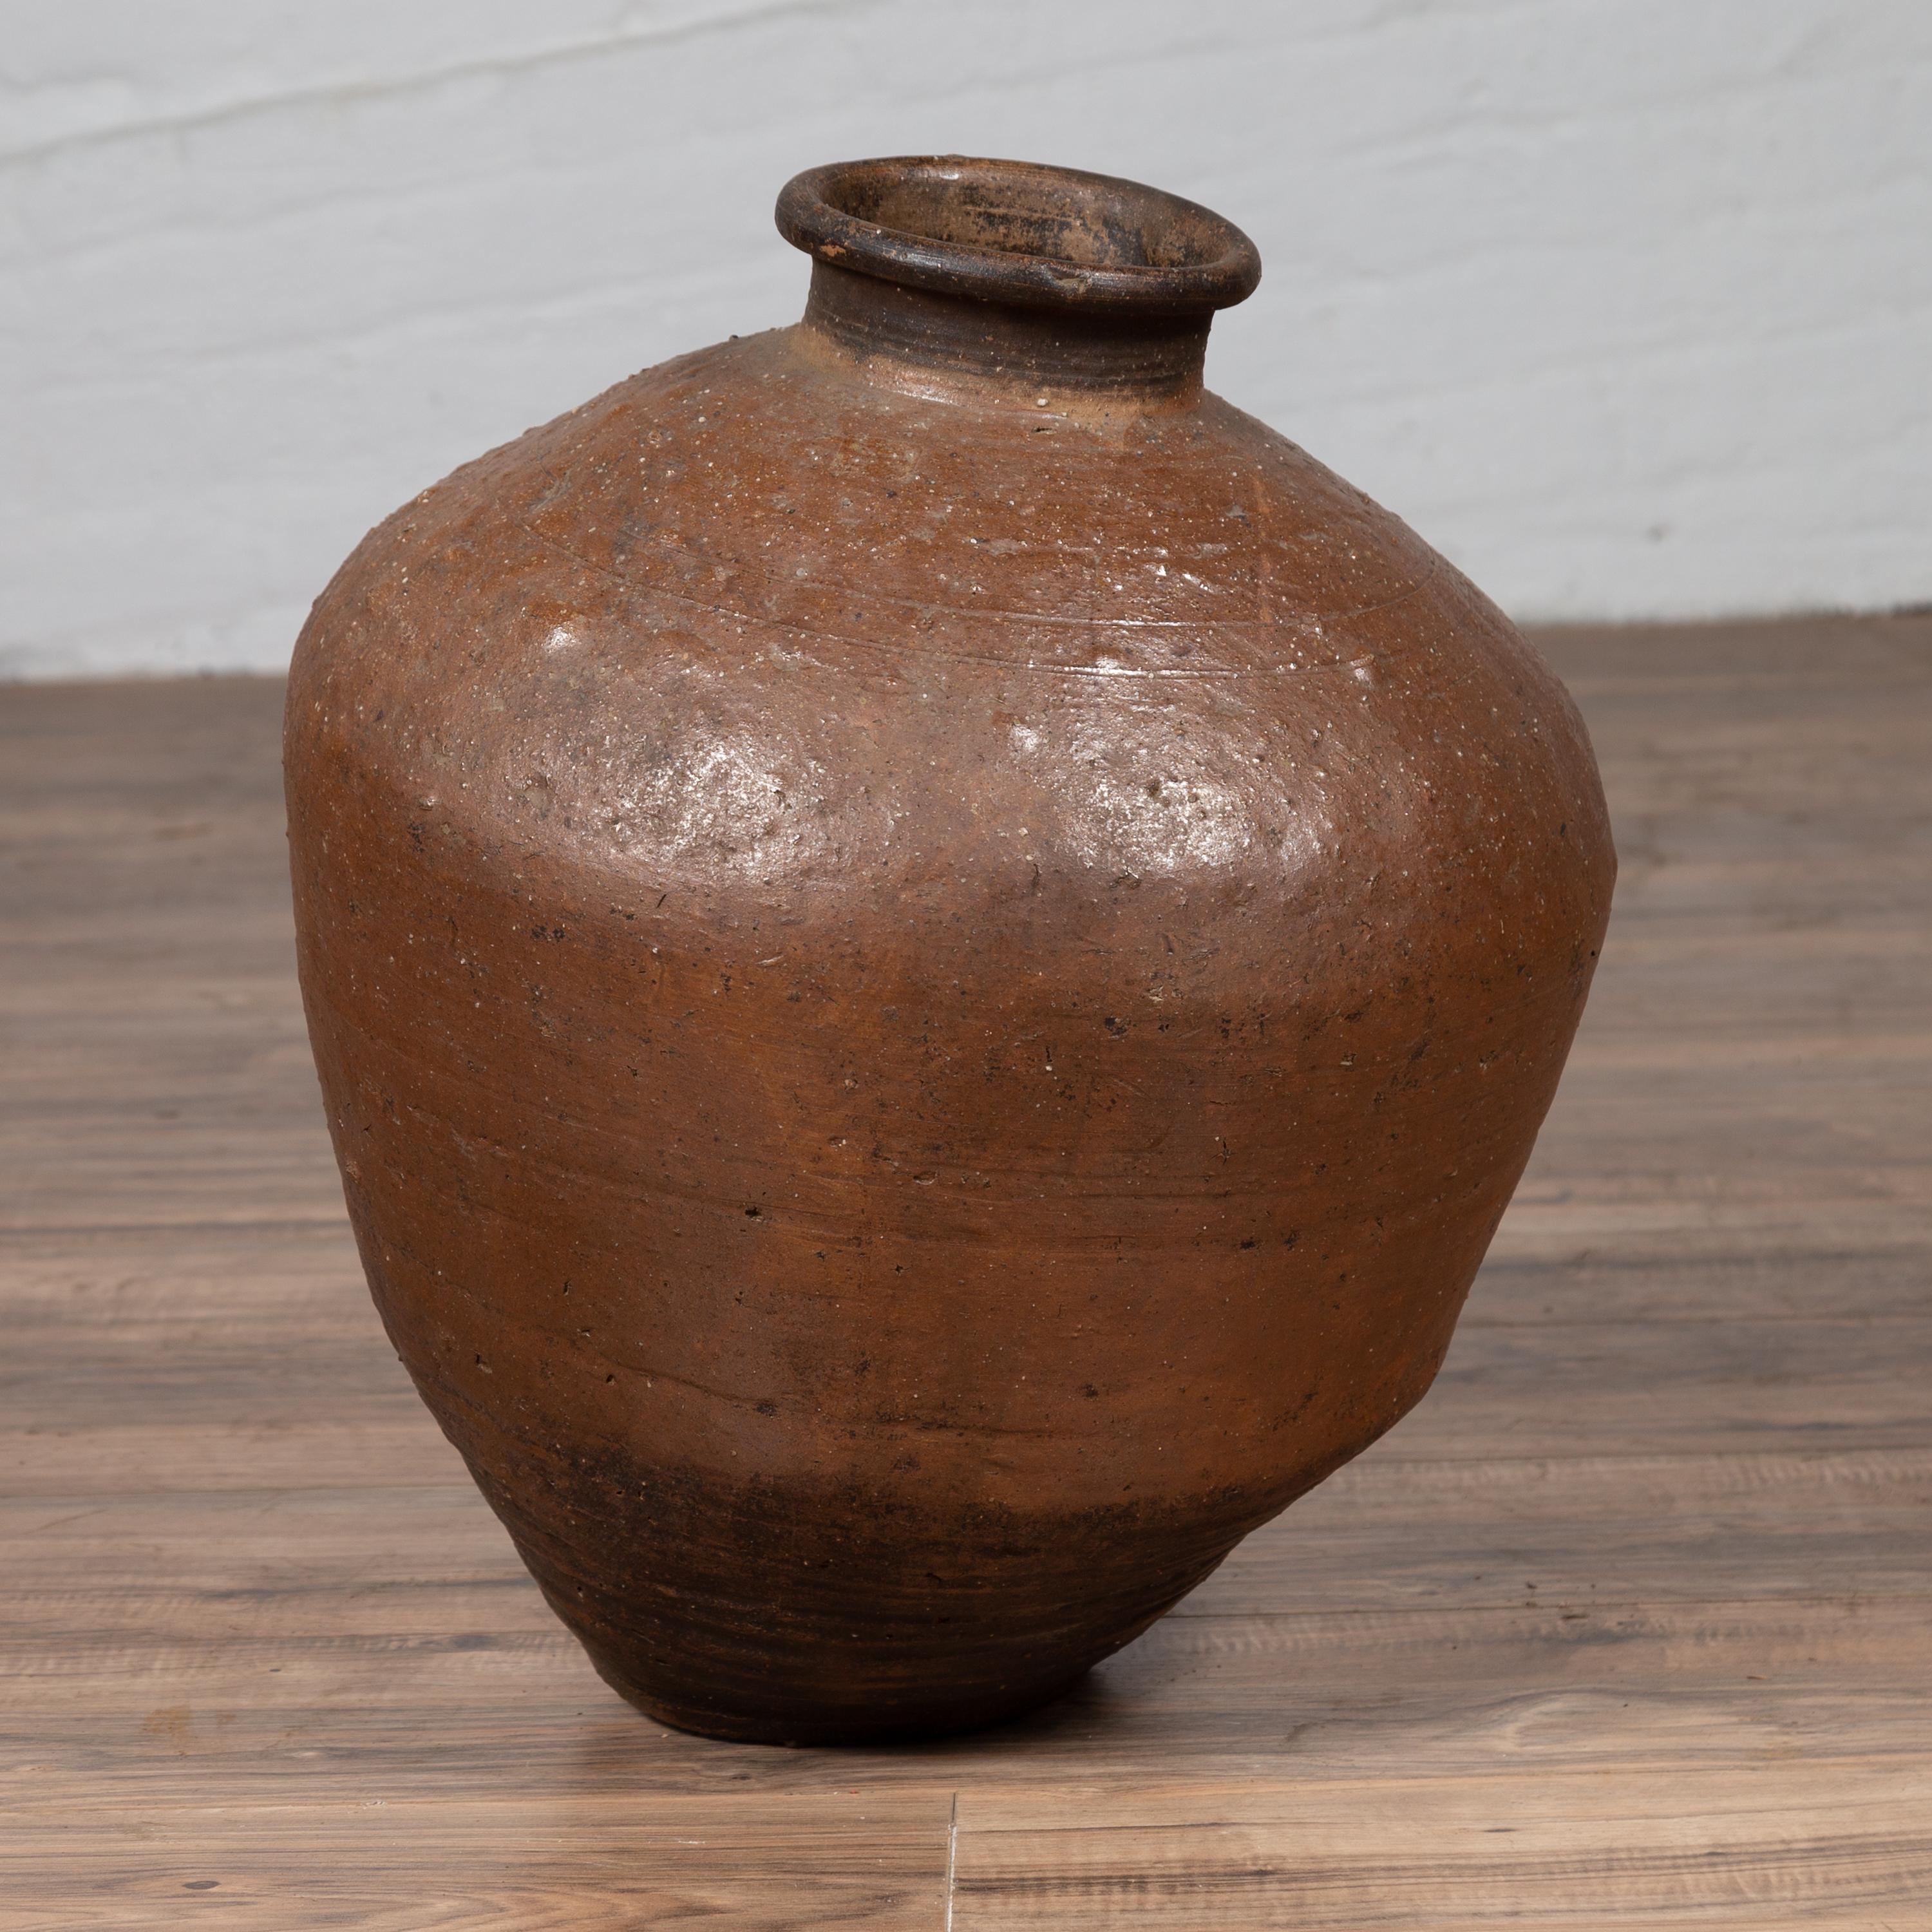 An antique Japanese brown oil jar from the early 20th century, with weathered appearance and irregular shape. Our eye is immediately drawn to the interesting shape of this Japanese oil jar, presenting a brown body with darker accent at the bottom